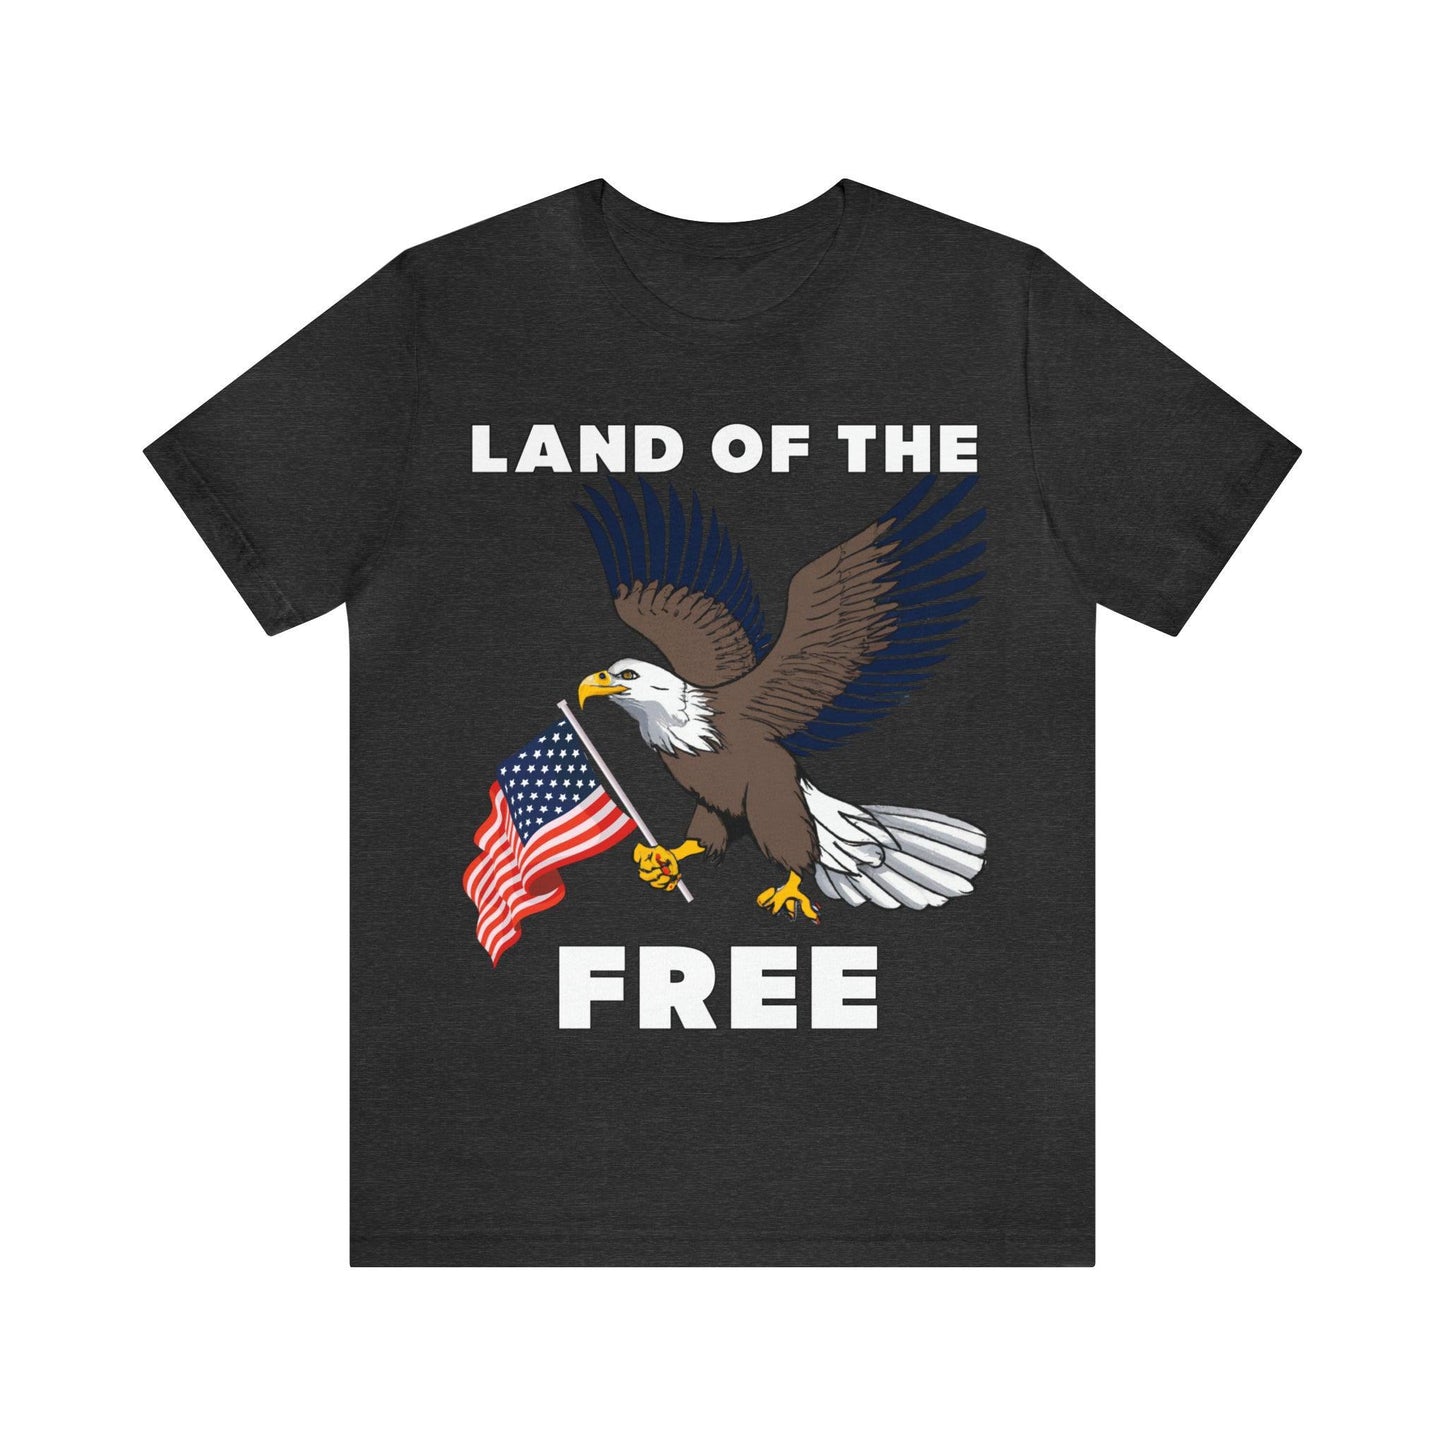 "Land of the Free, Home of the Brave: Celebrate Independence Day with Patriotic Shirts, Flag shirt - Freedom, Fireworks, and More - Giftsmojo